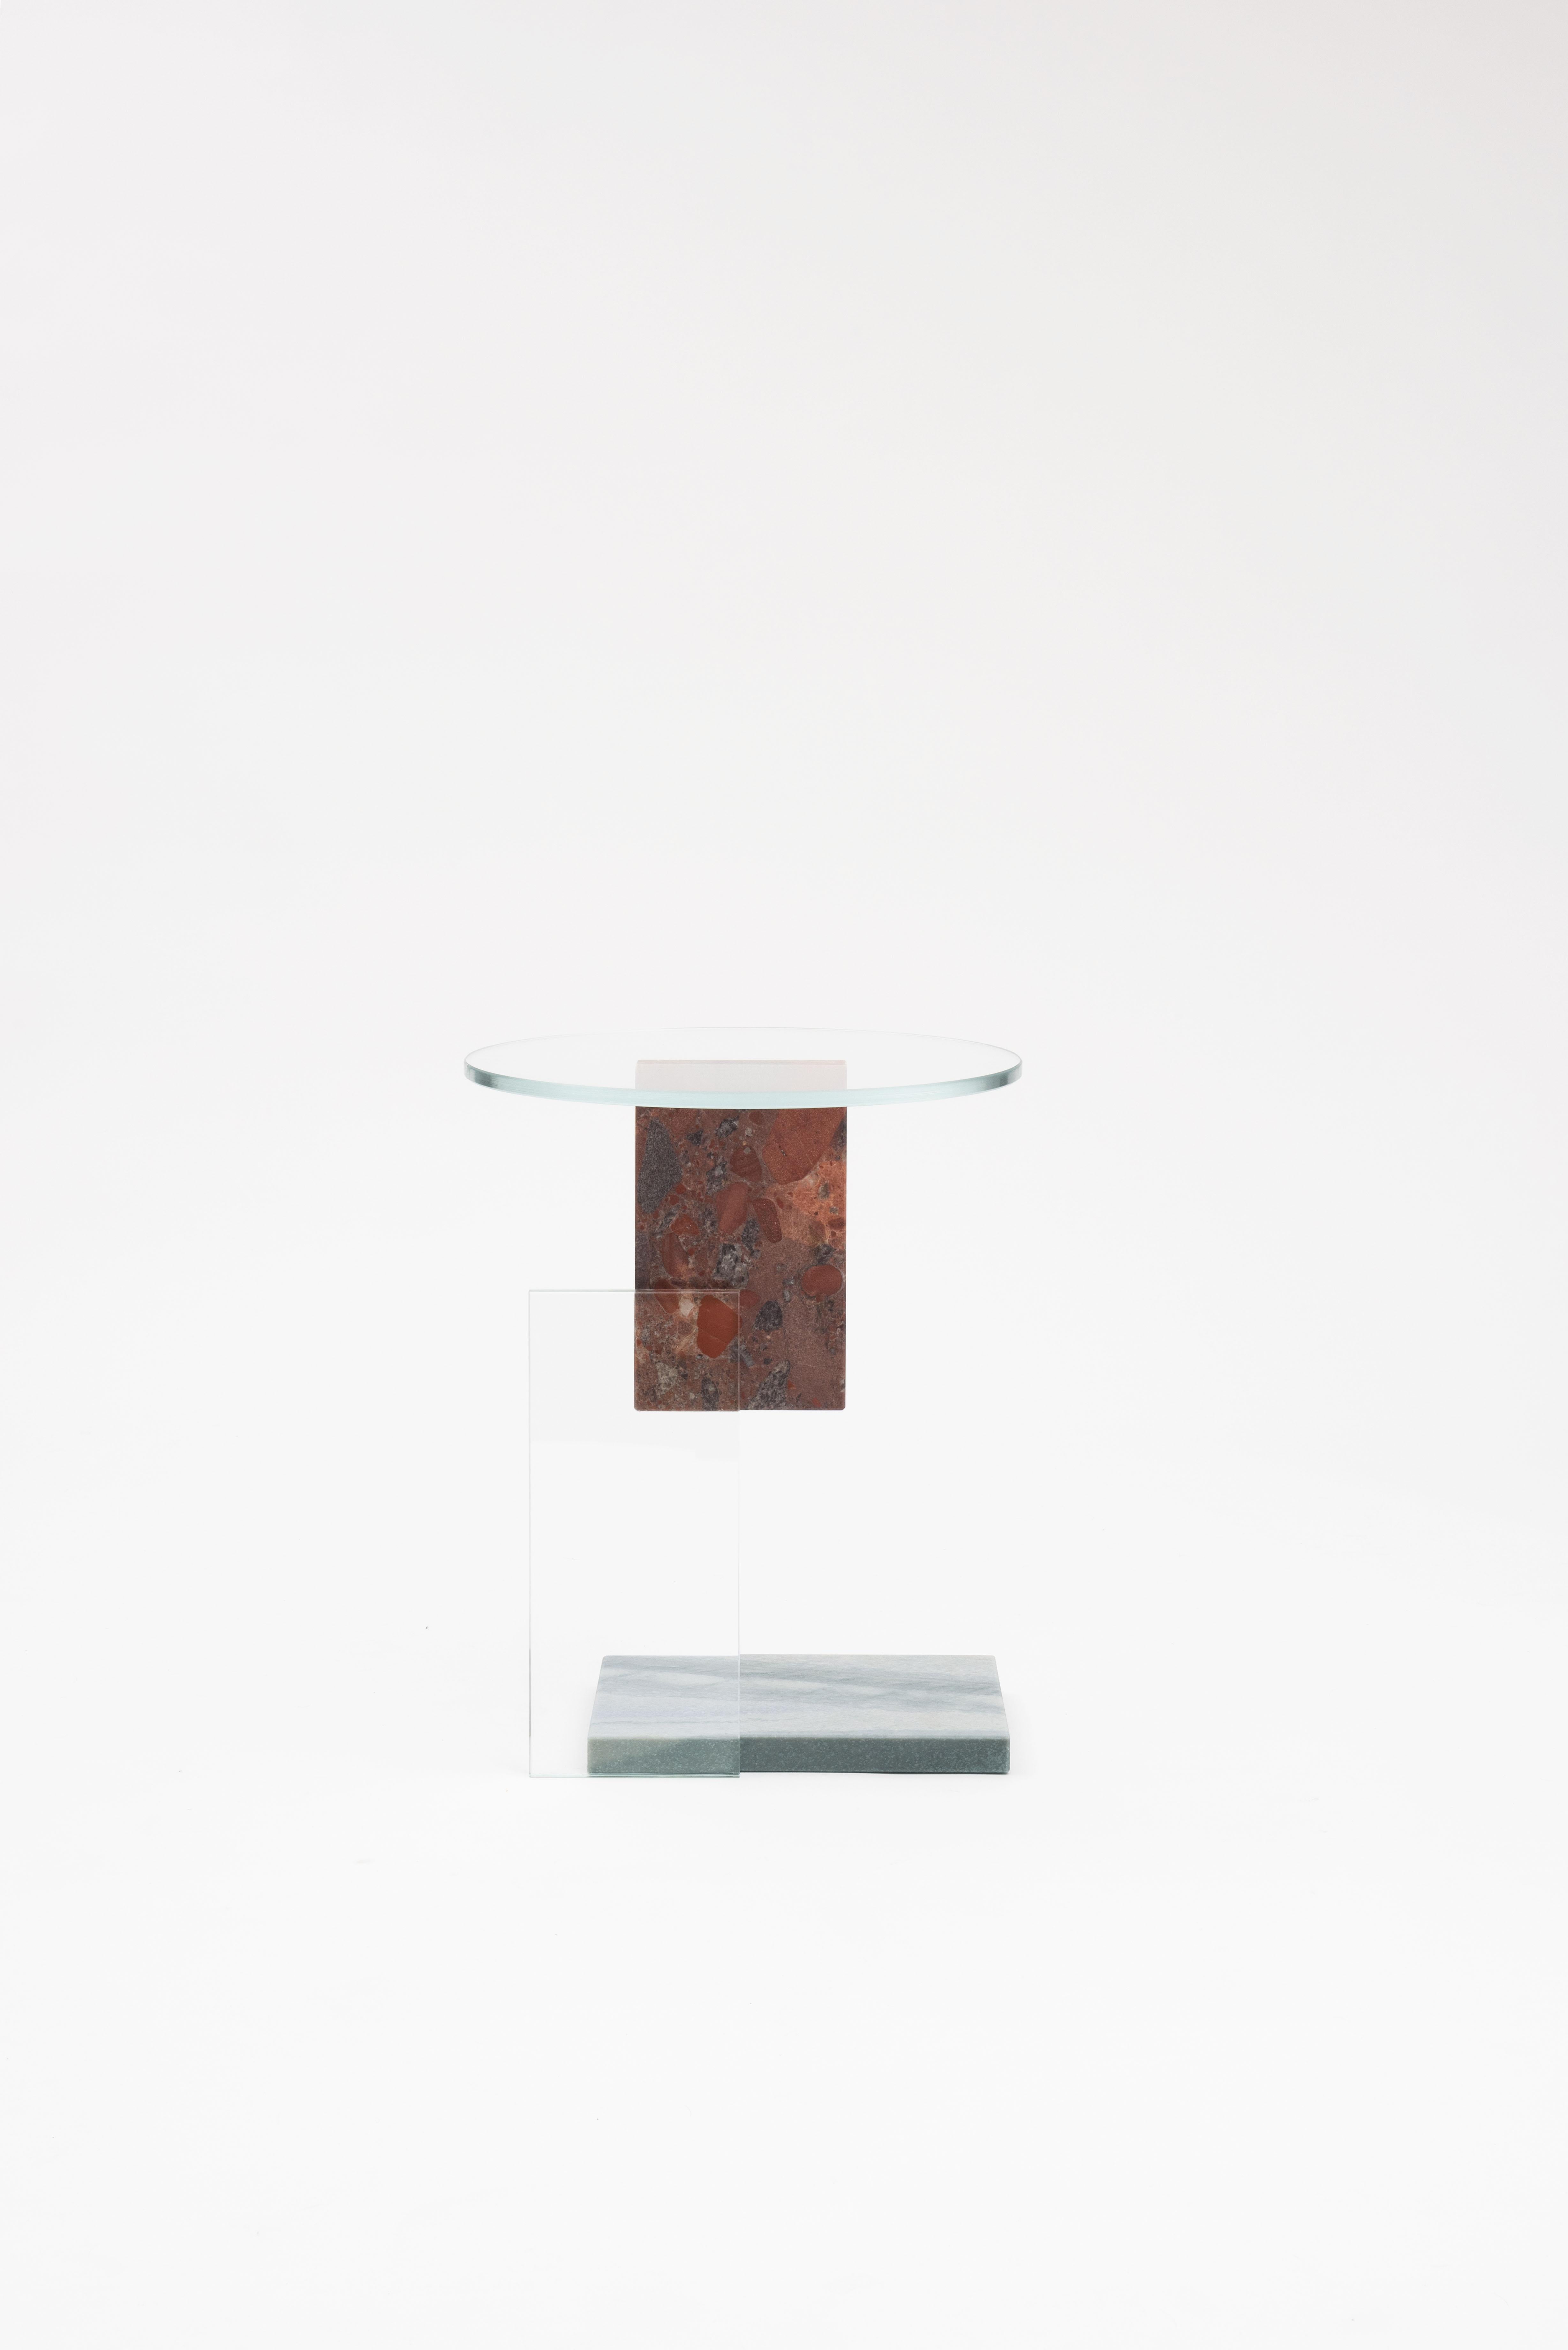 Delta S side table by Frederic Saulou
Limited Edition of 10
Materials: White glass, Azur Imperial marble from Brésil, Marinagé Rouge marble from Brésil.
Dimensions: D 40 x H 50 cm
Signed and numbered.

